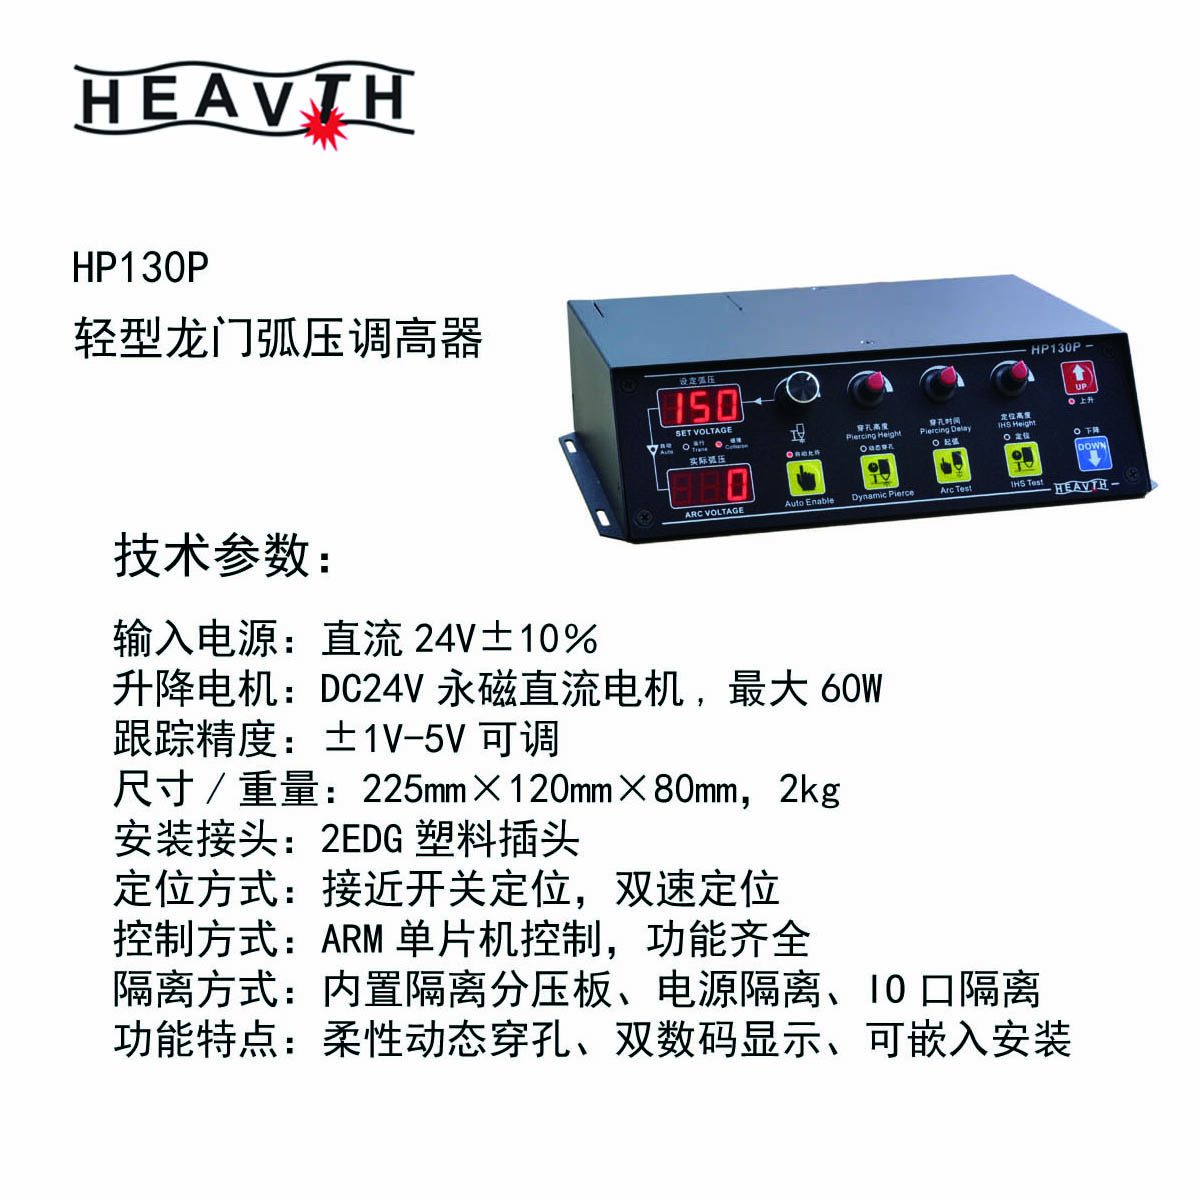 HP130P TABLE PLASMA TORCH HEIGHT CONTROLLER